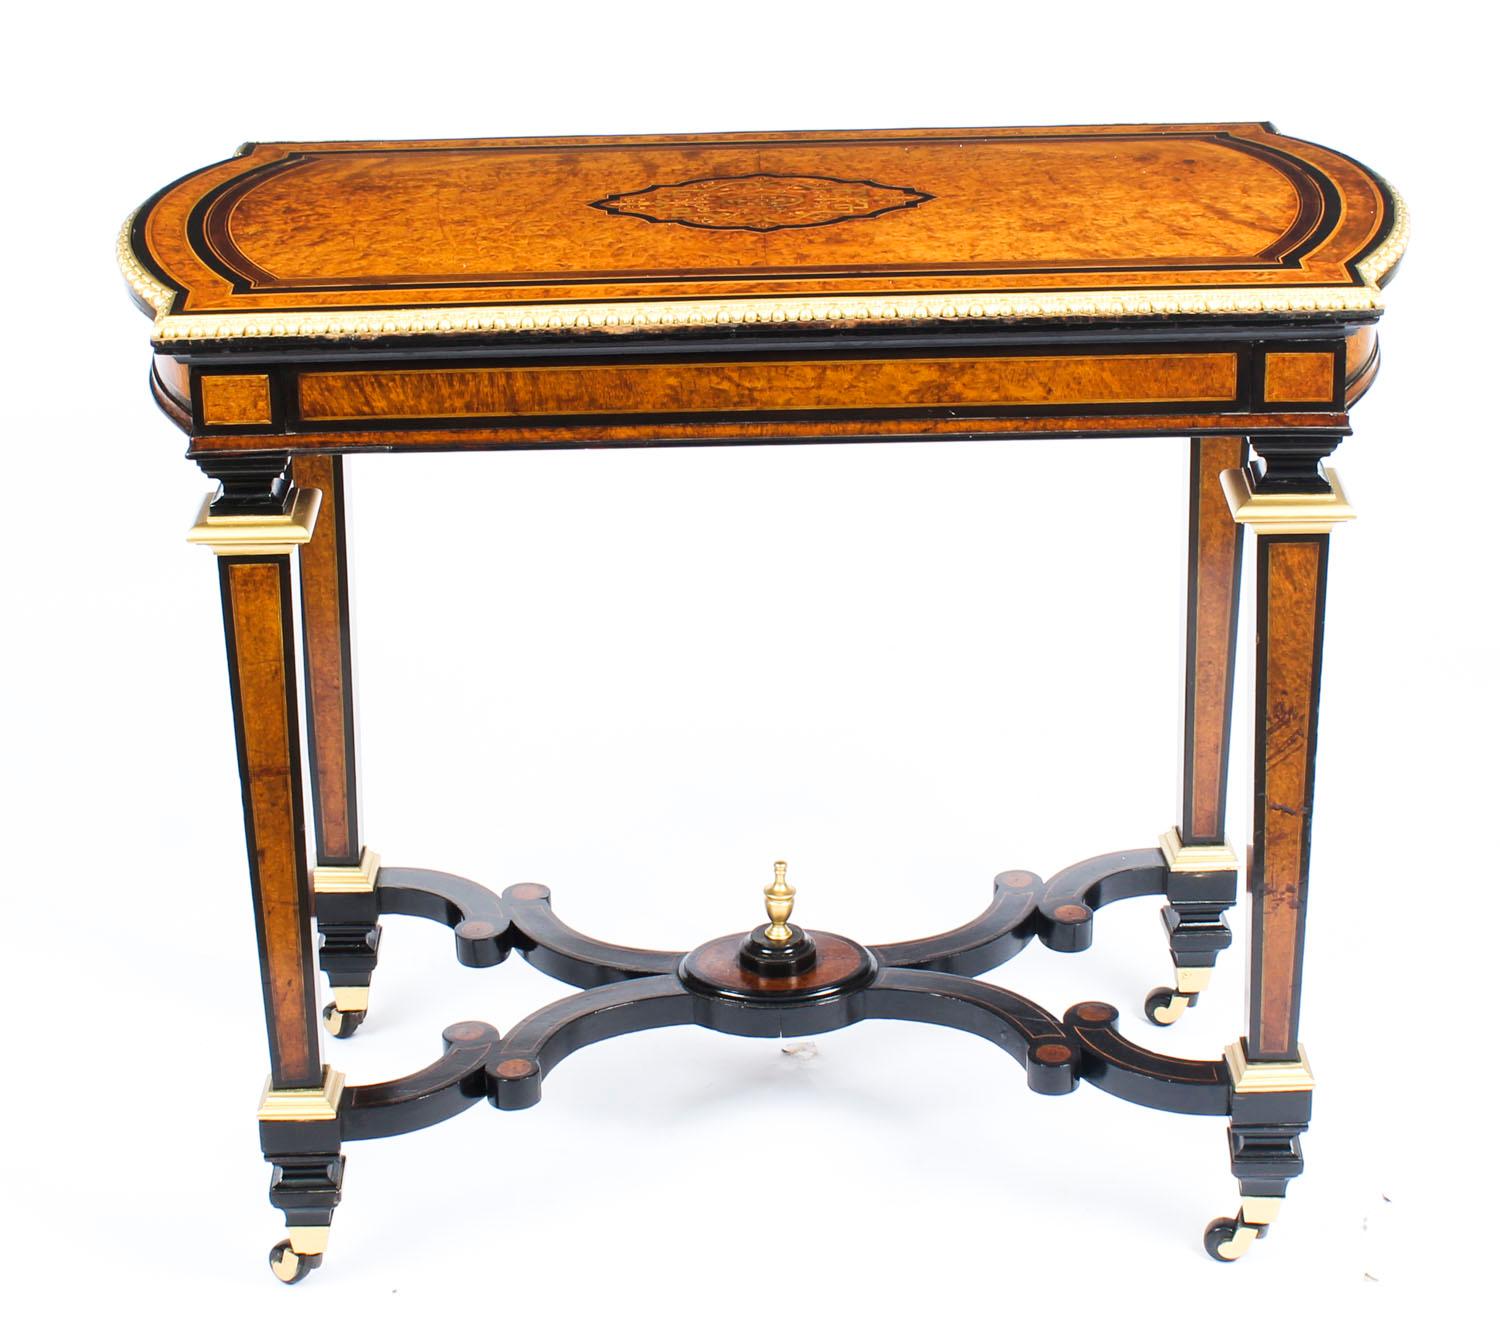 This is a fine antique ormolu mounted Victorian amboyna and ebonized card table, circa 1850 in date.

The shaped inlaid and crossbanded swivel table top enclosing a green baize lining, perfect for playing cards. It is raised on square section